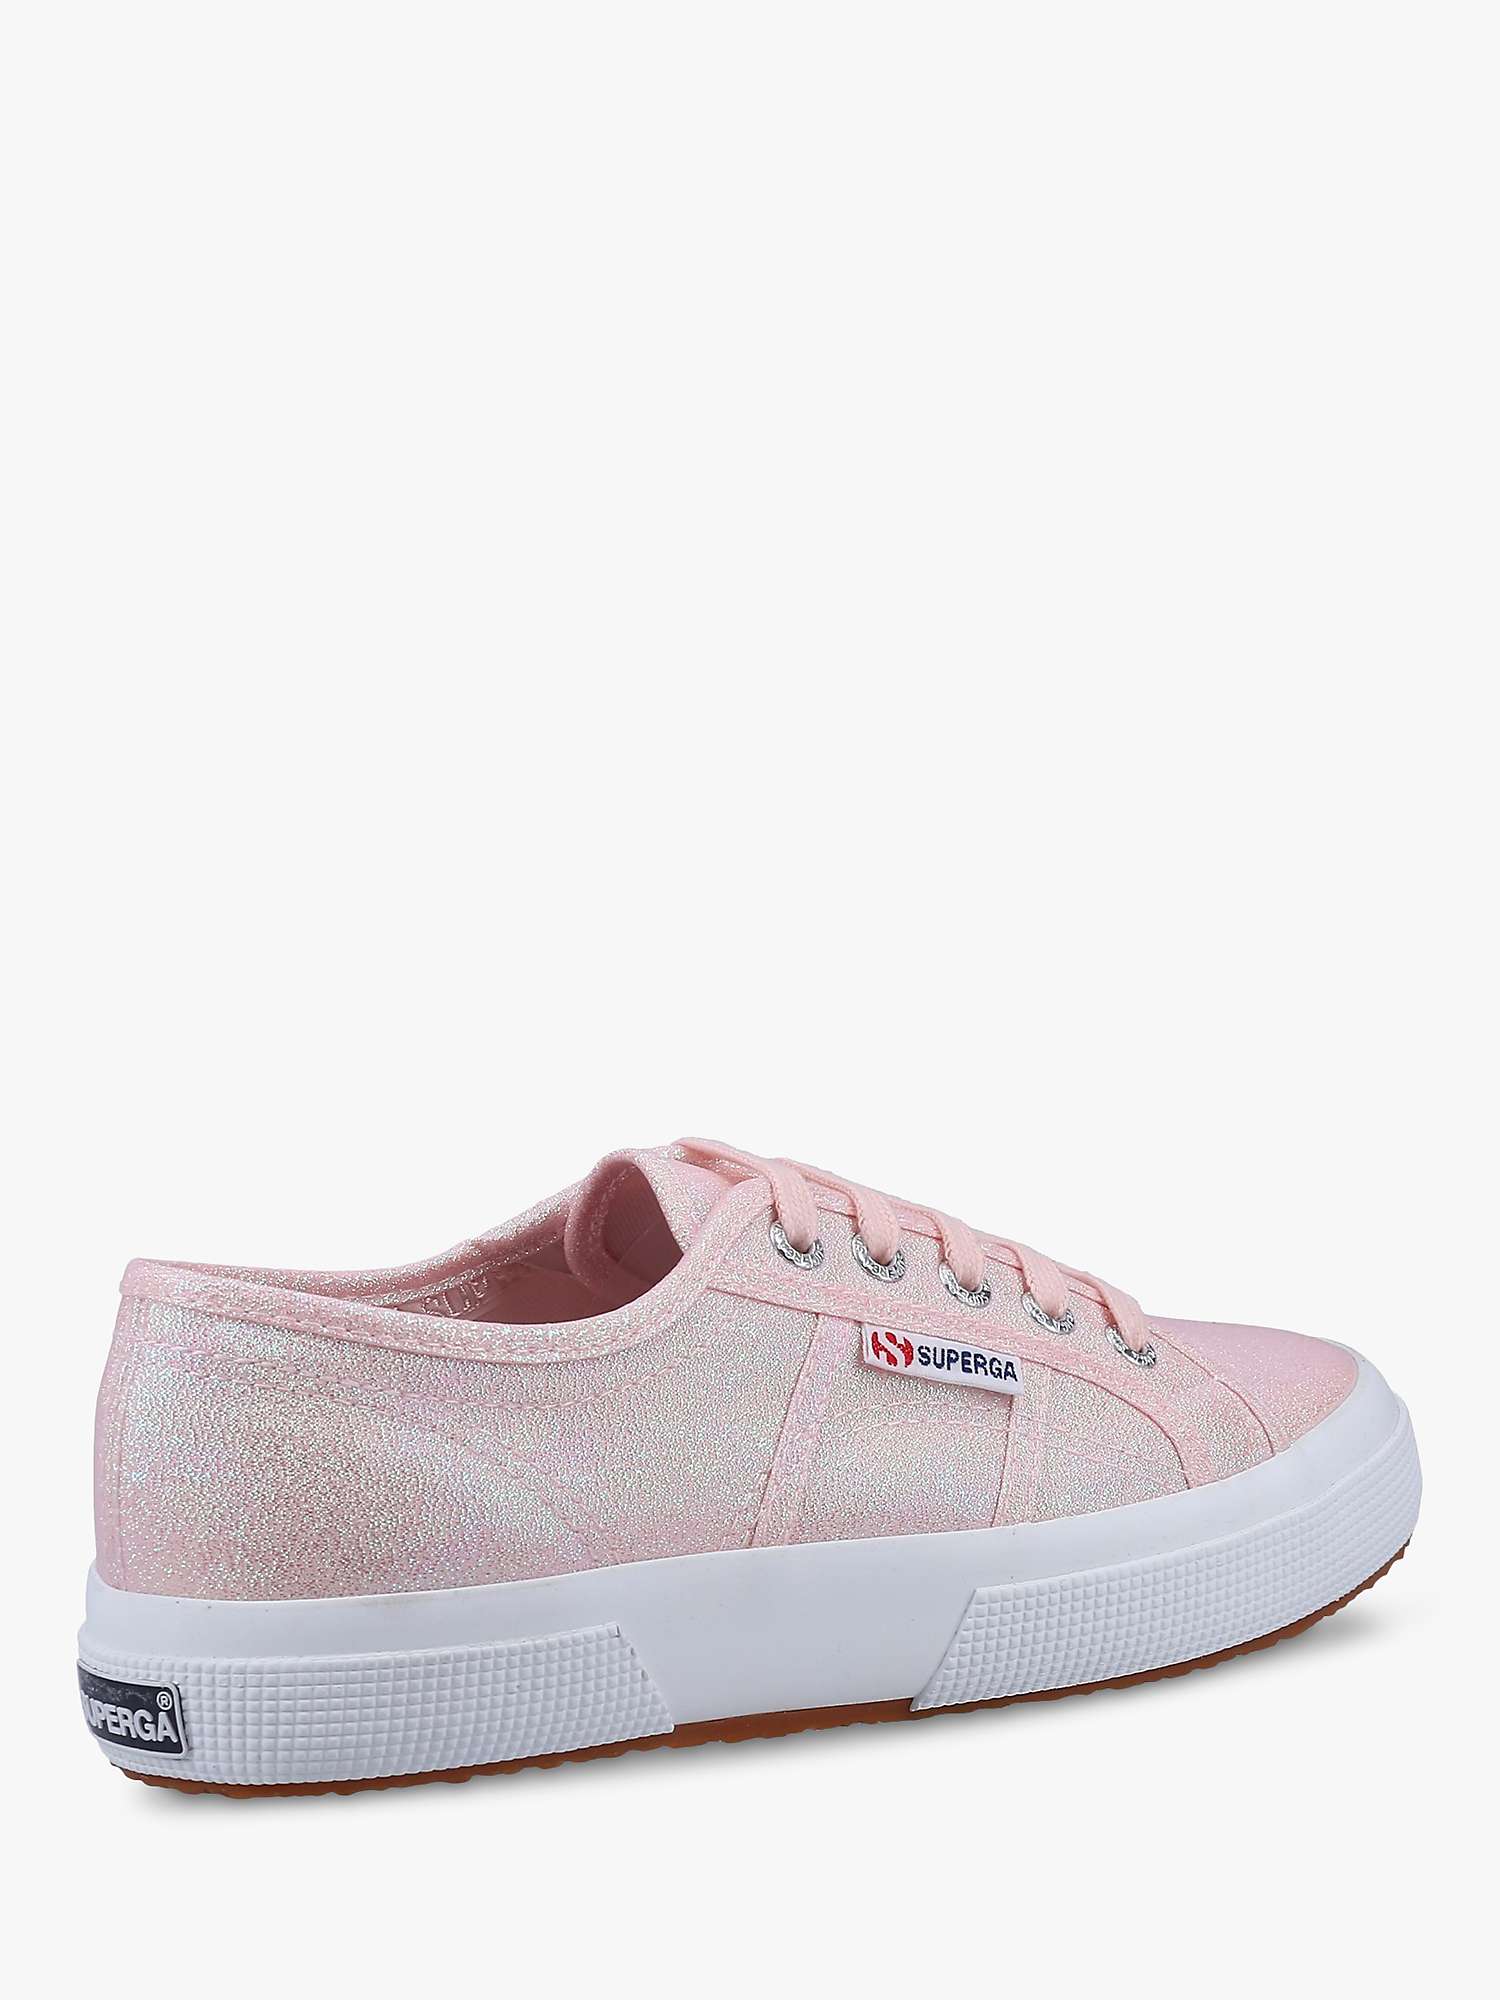 Buy Superga 2750 Lame Trainers Online at johnlewis.com